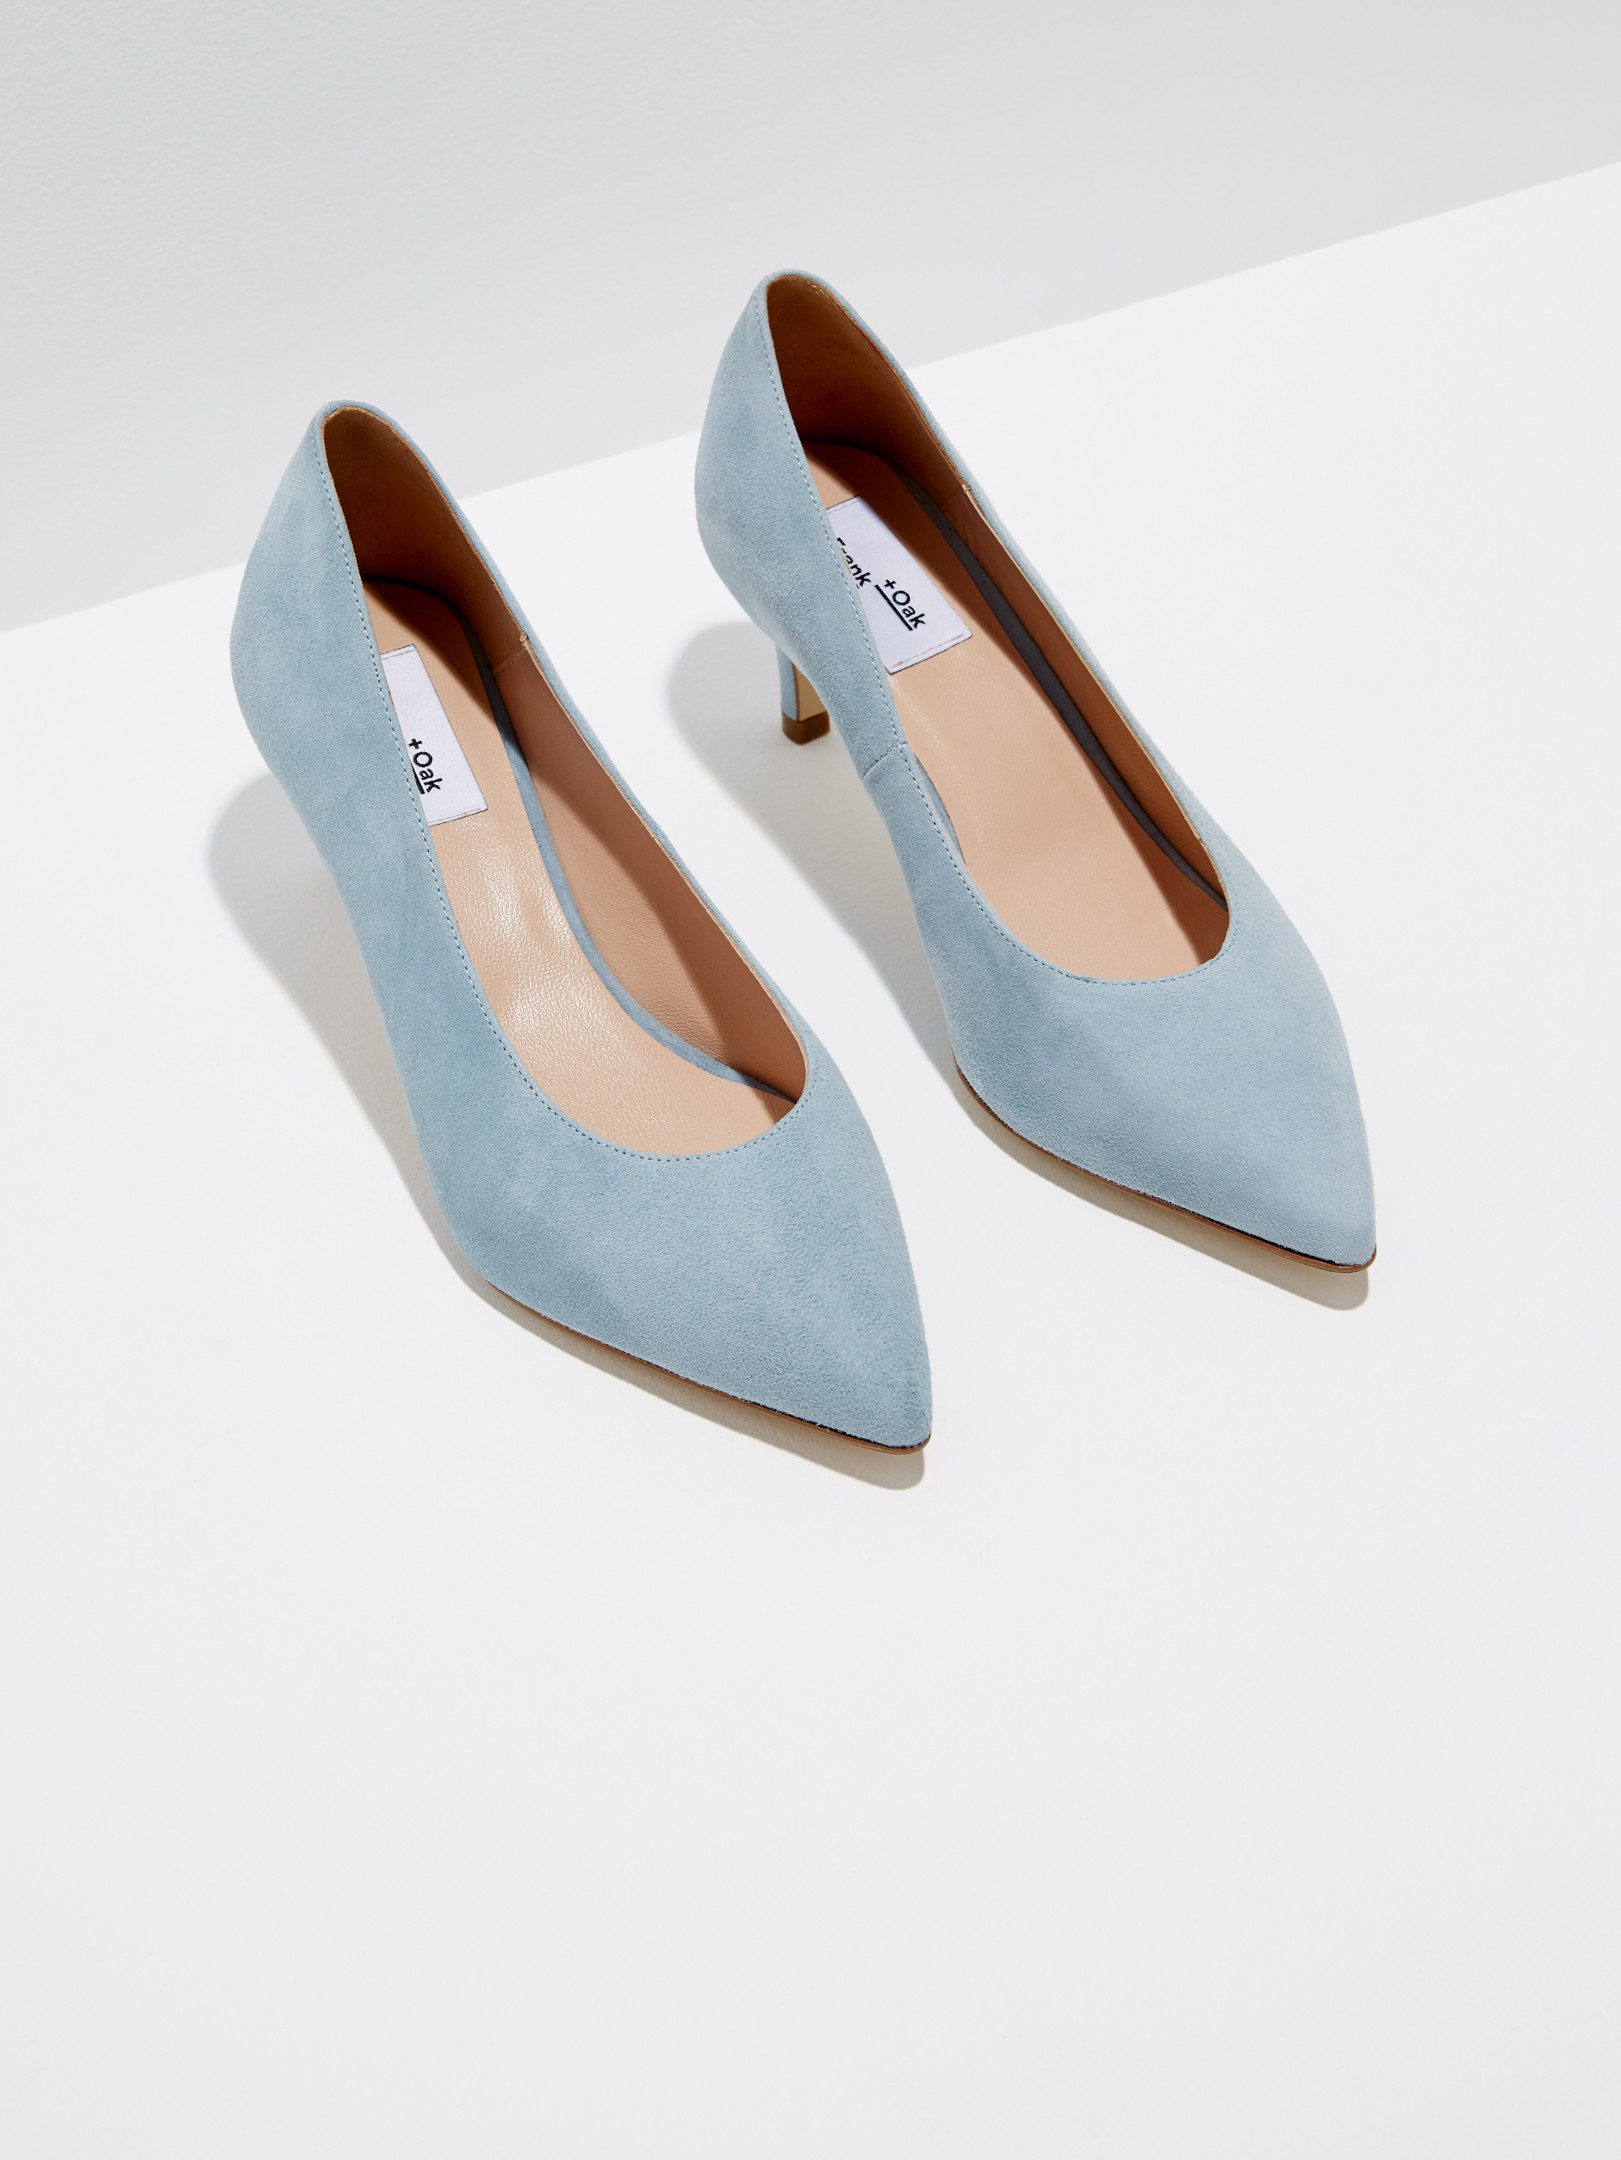 Frank + Oak Launches Womens Shoes and They've Got All the Basics You've ...